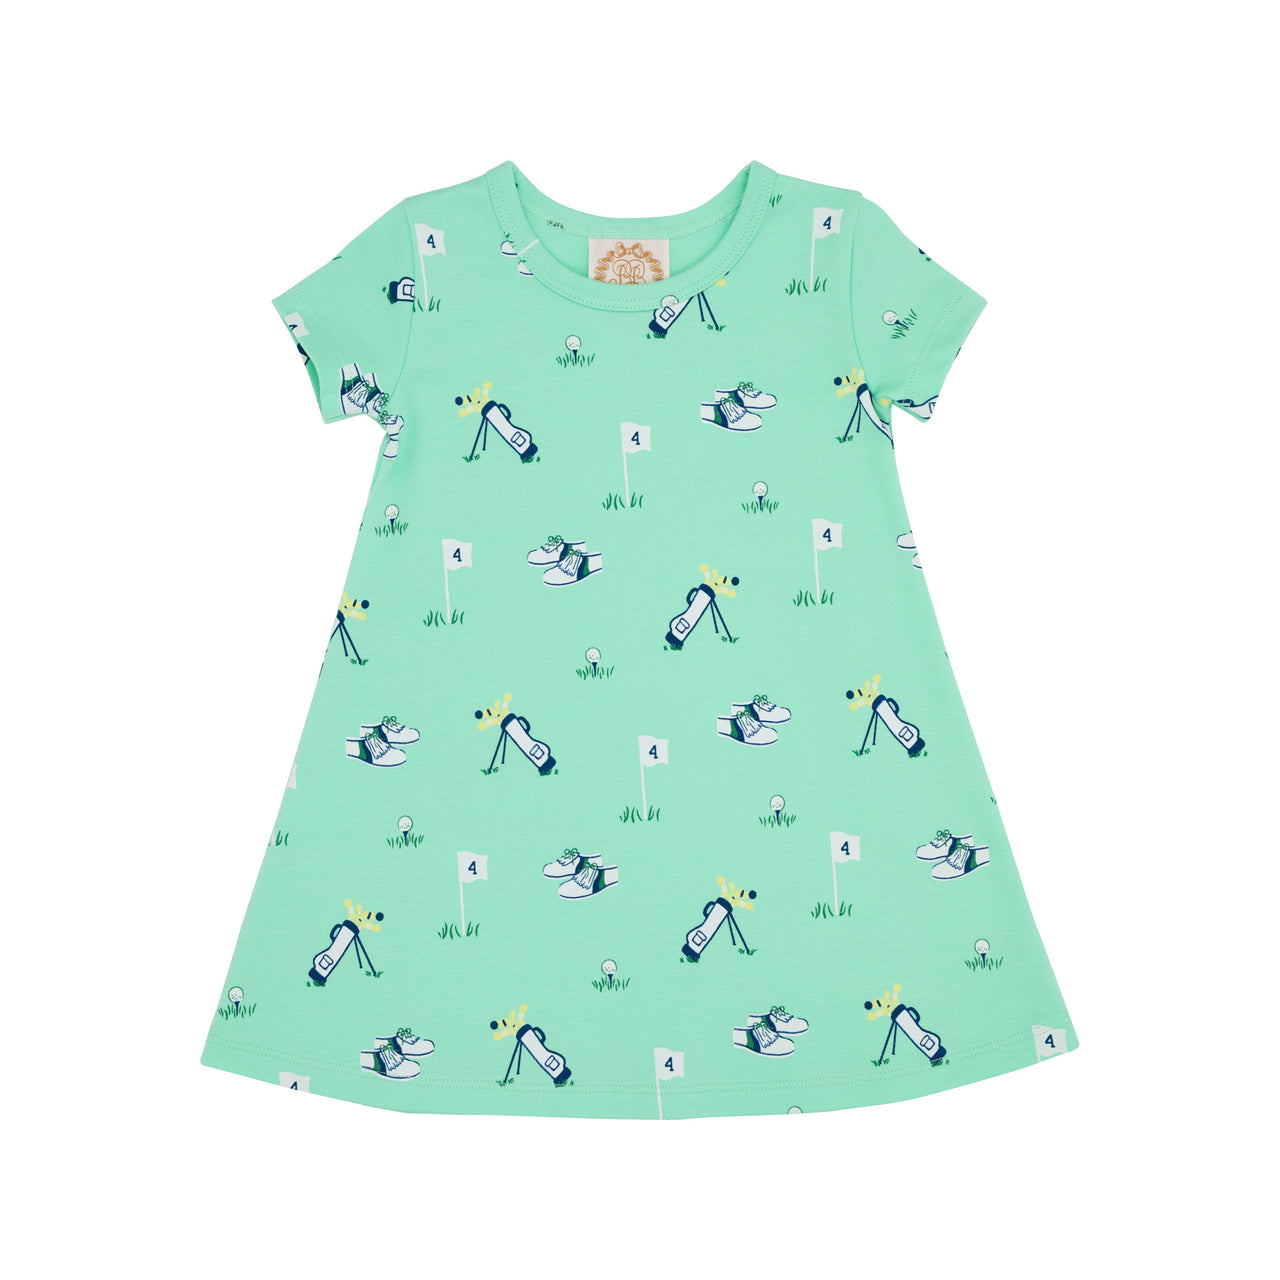 Polly Play Dress | Mulligans and Manners